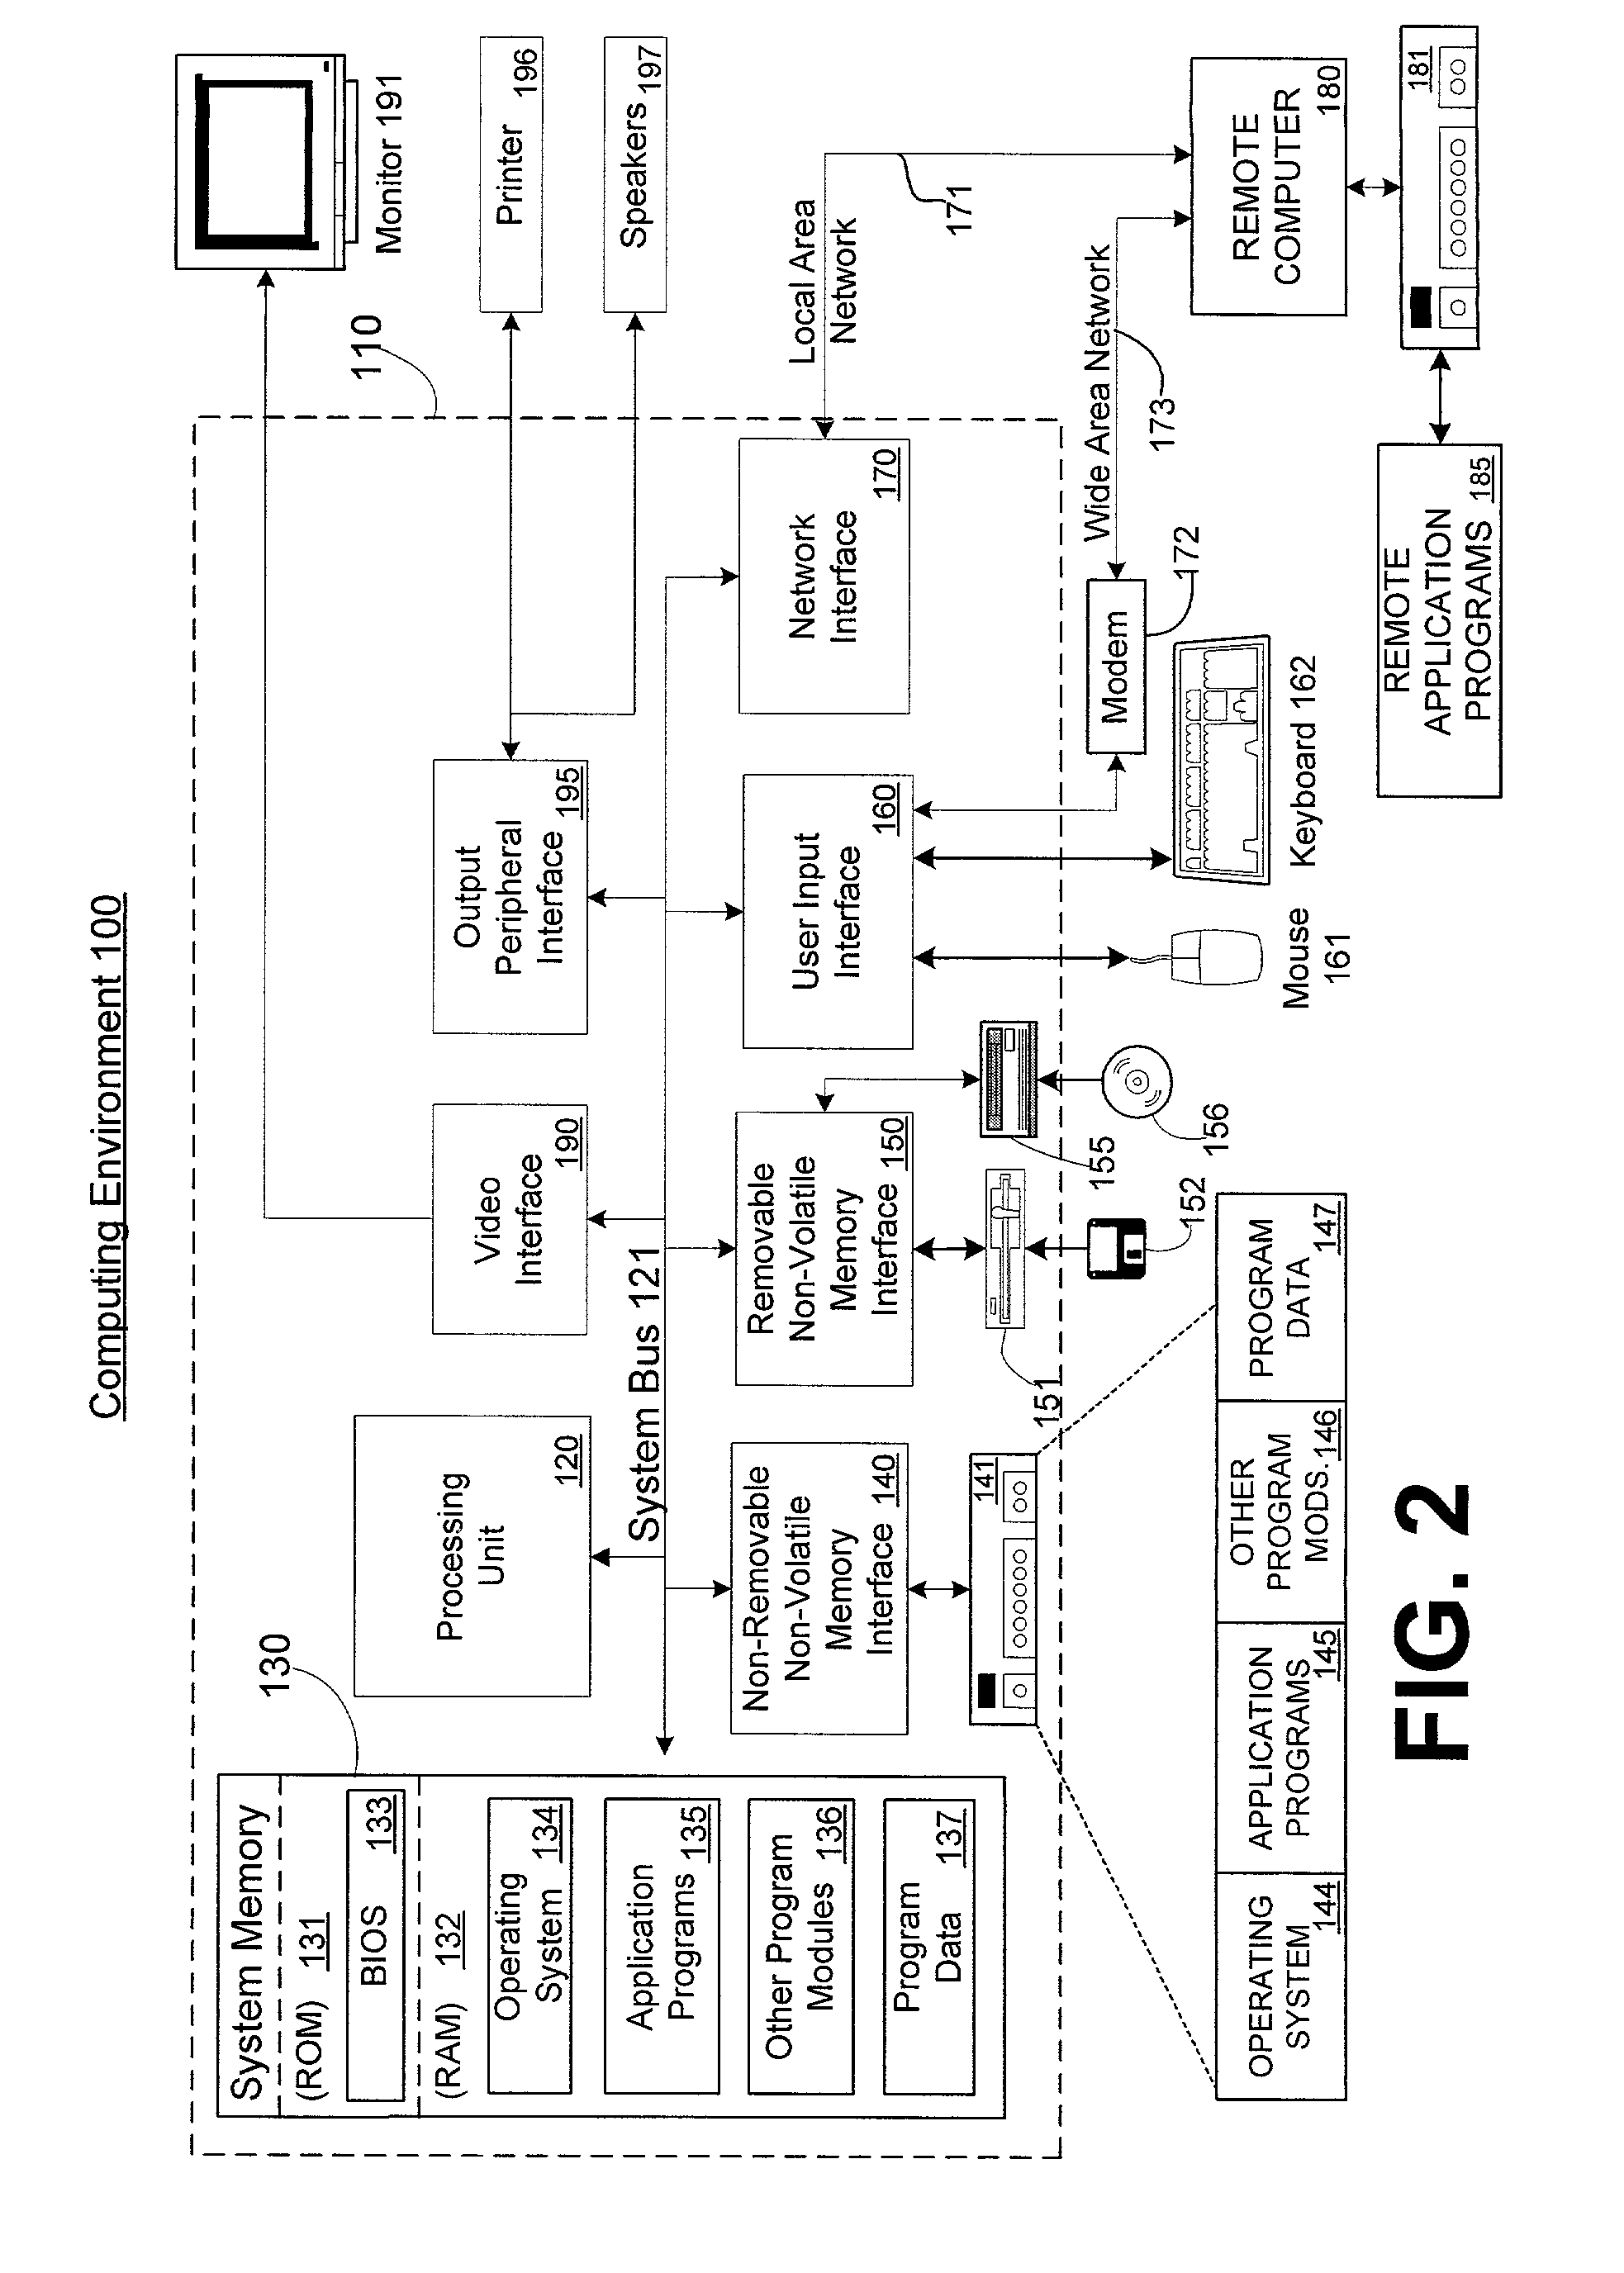 System and methods for providing a declarative syntax for specifying SOAP-based web services